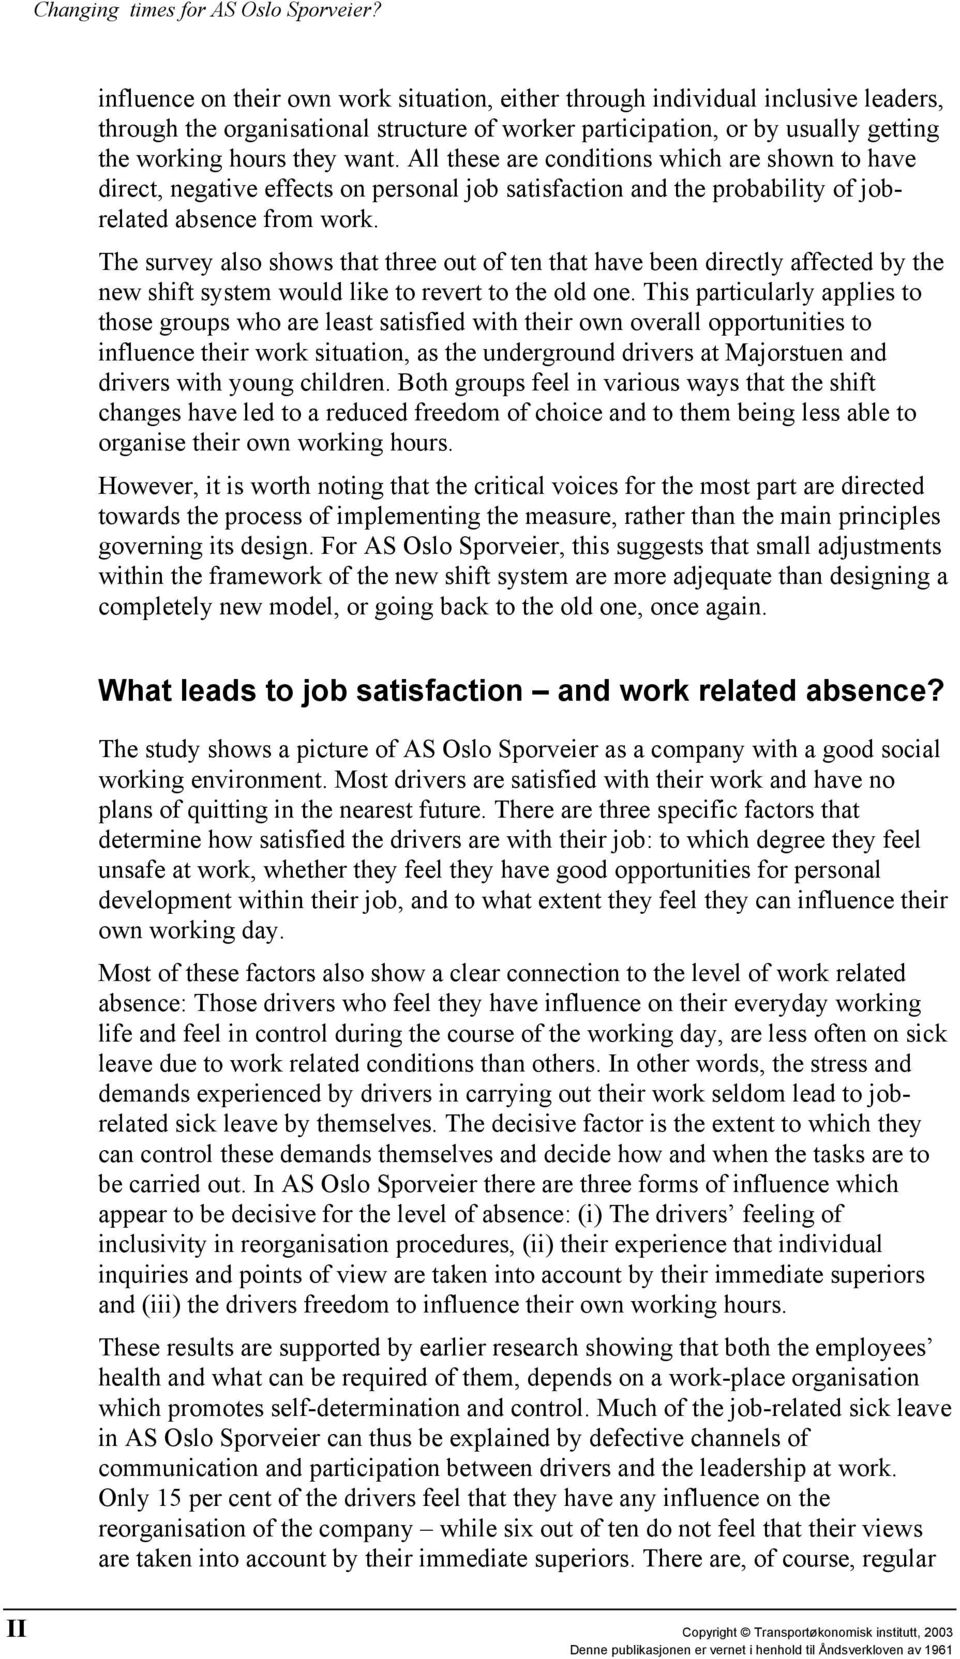 All these are conditions which are shown to have direct, negative effects on personal job satisfaction and the probability of jobrelated absence from work.